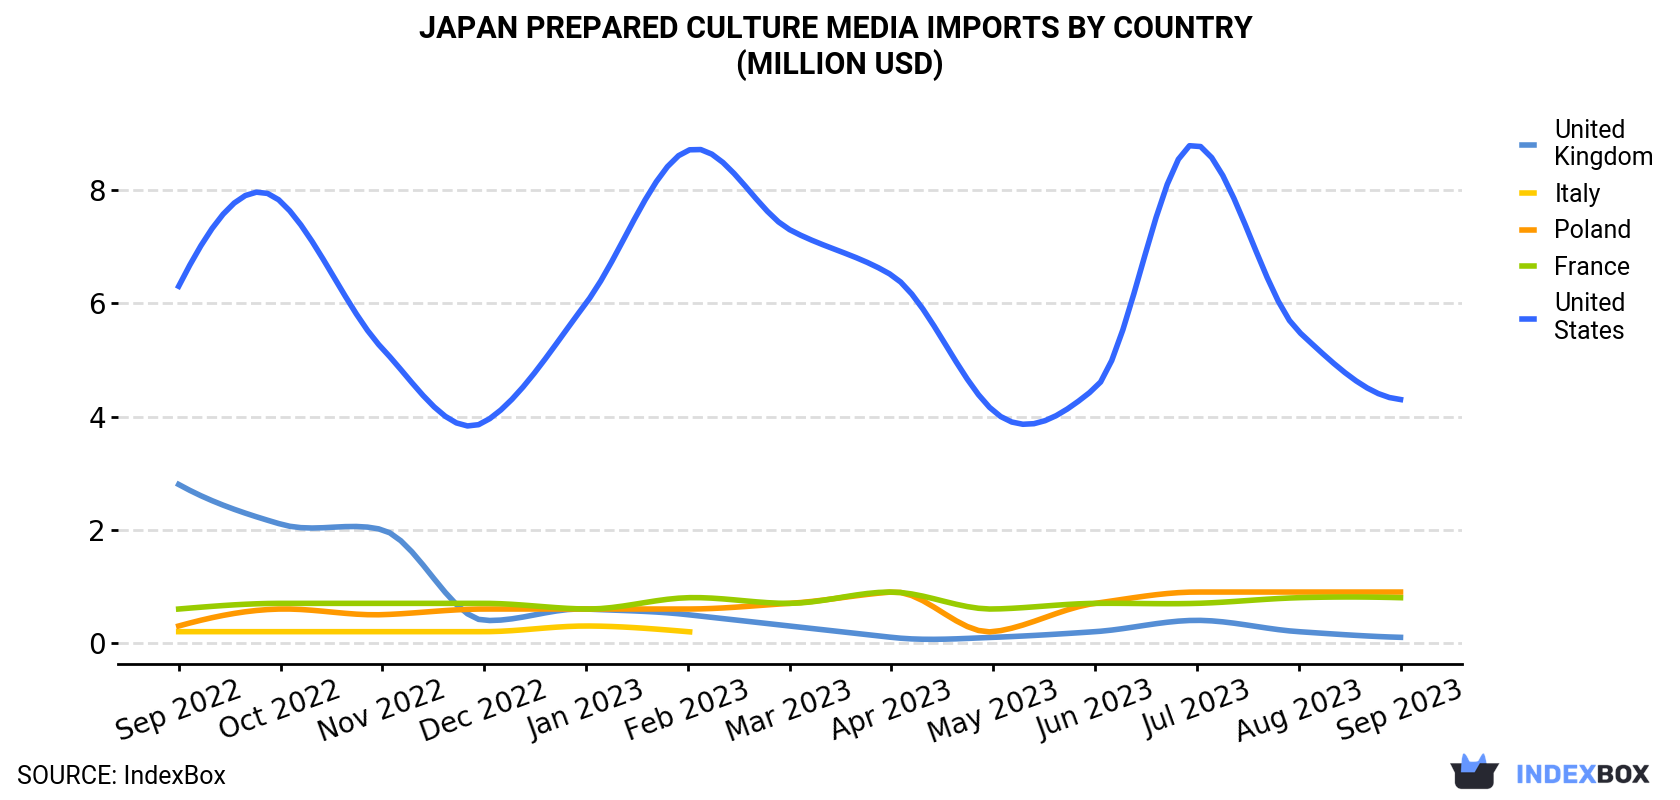 Japan Prepared Culture Media Imports By Country (Million USD)